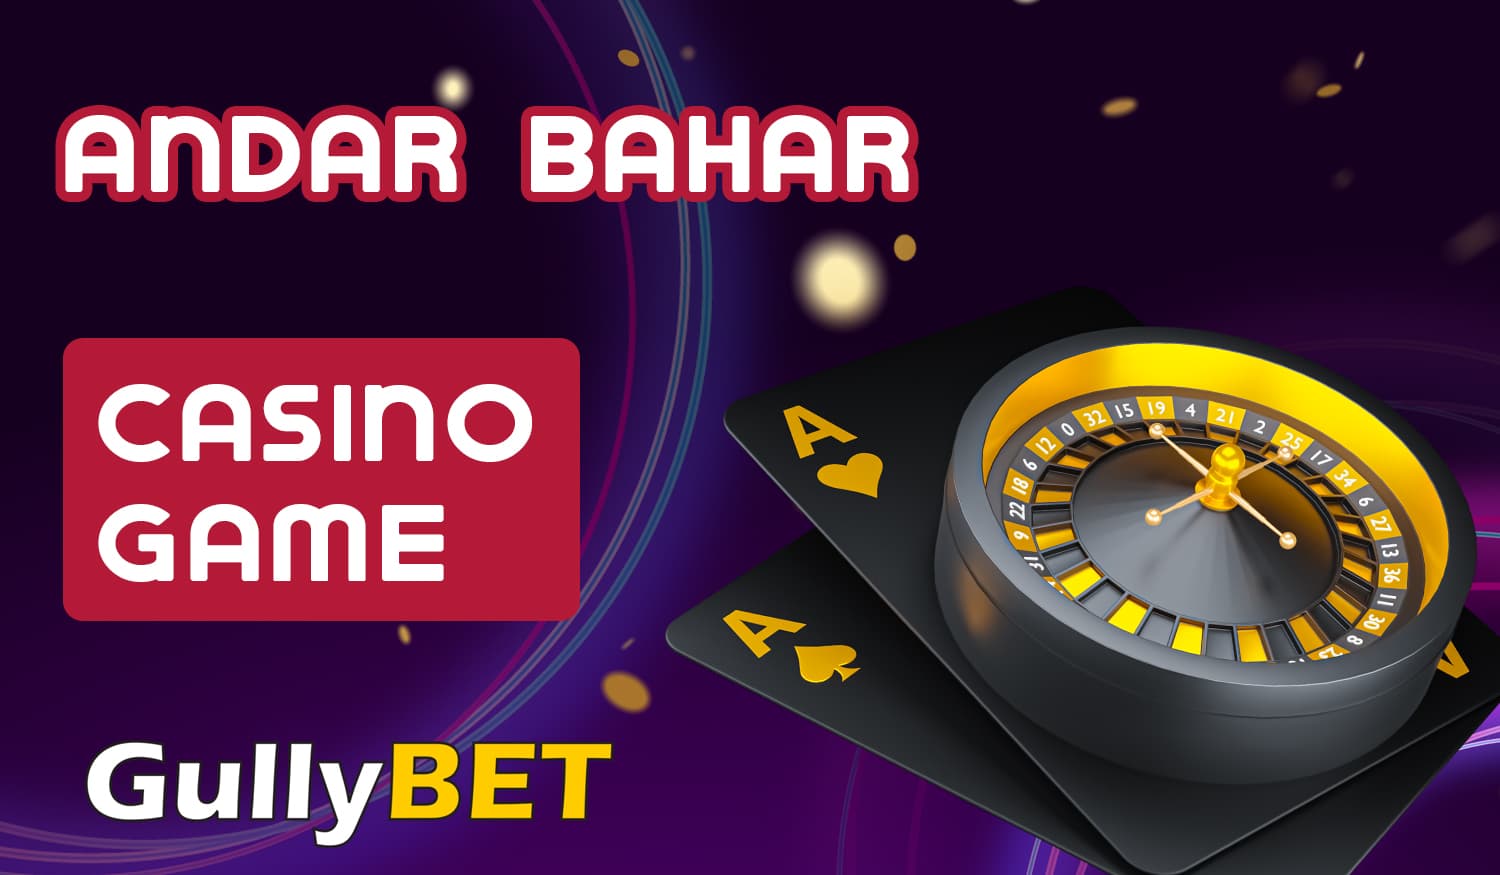 Online casino games available for users from India on Gullybet